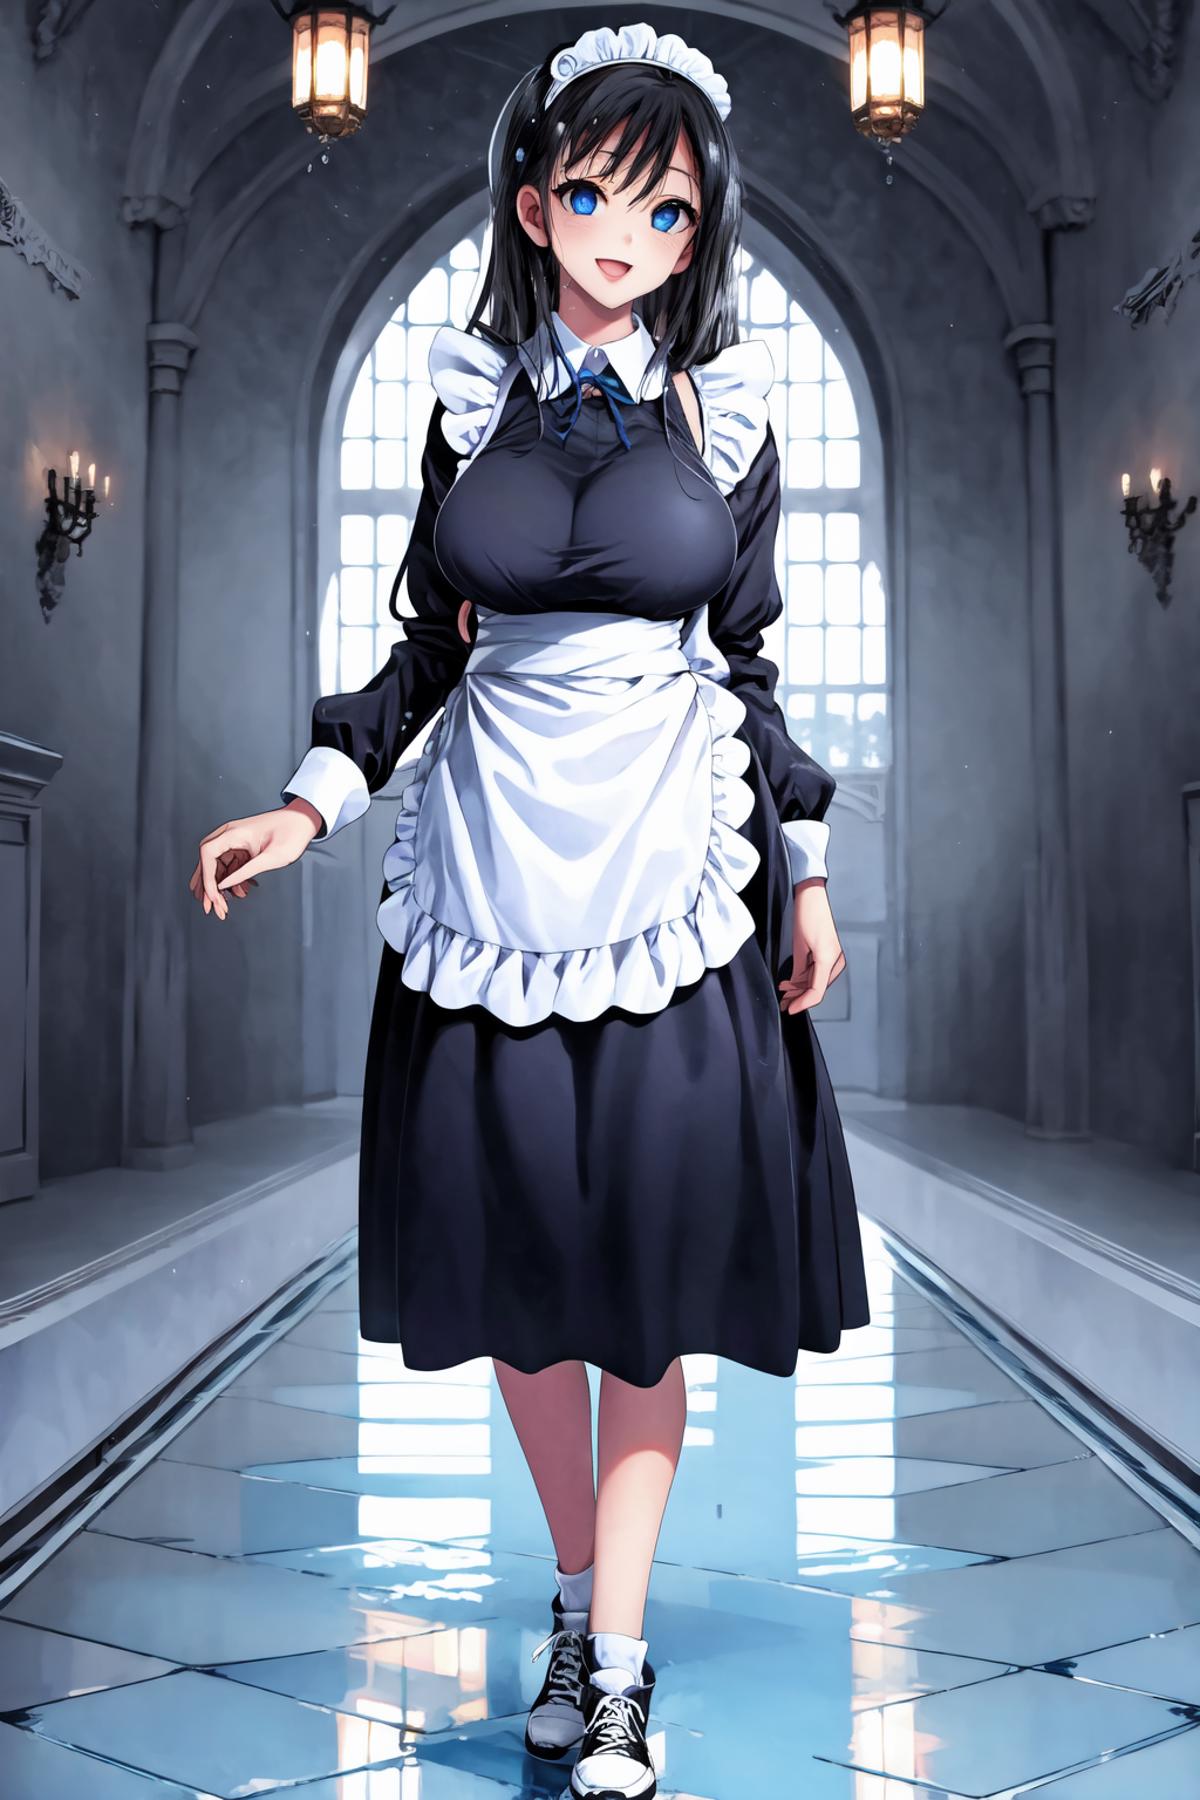 Traditional Maid Dress image by kettleSettle